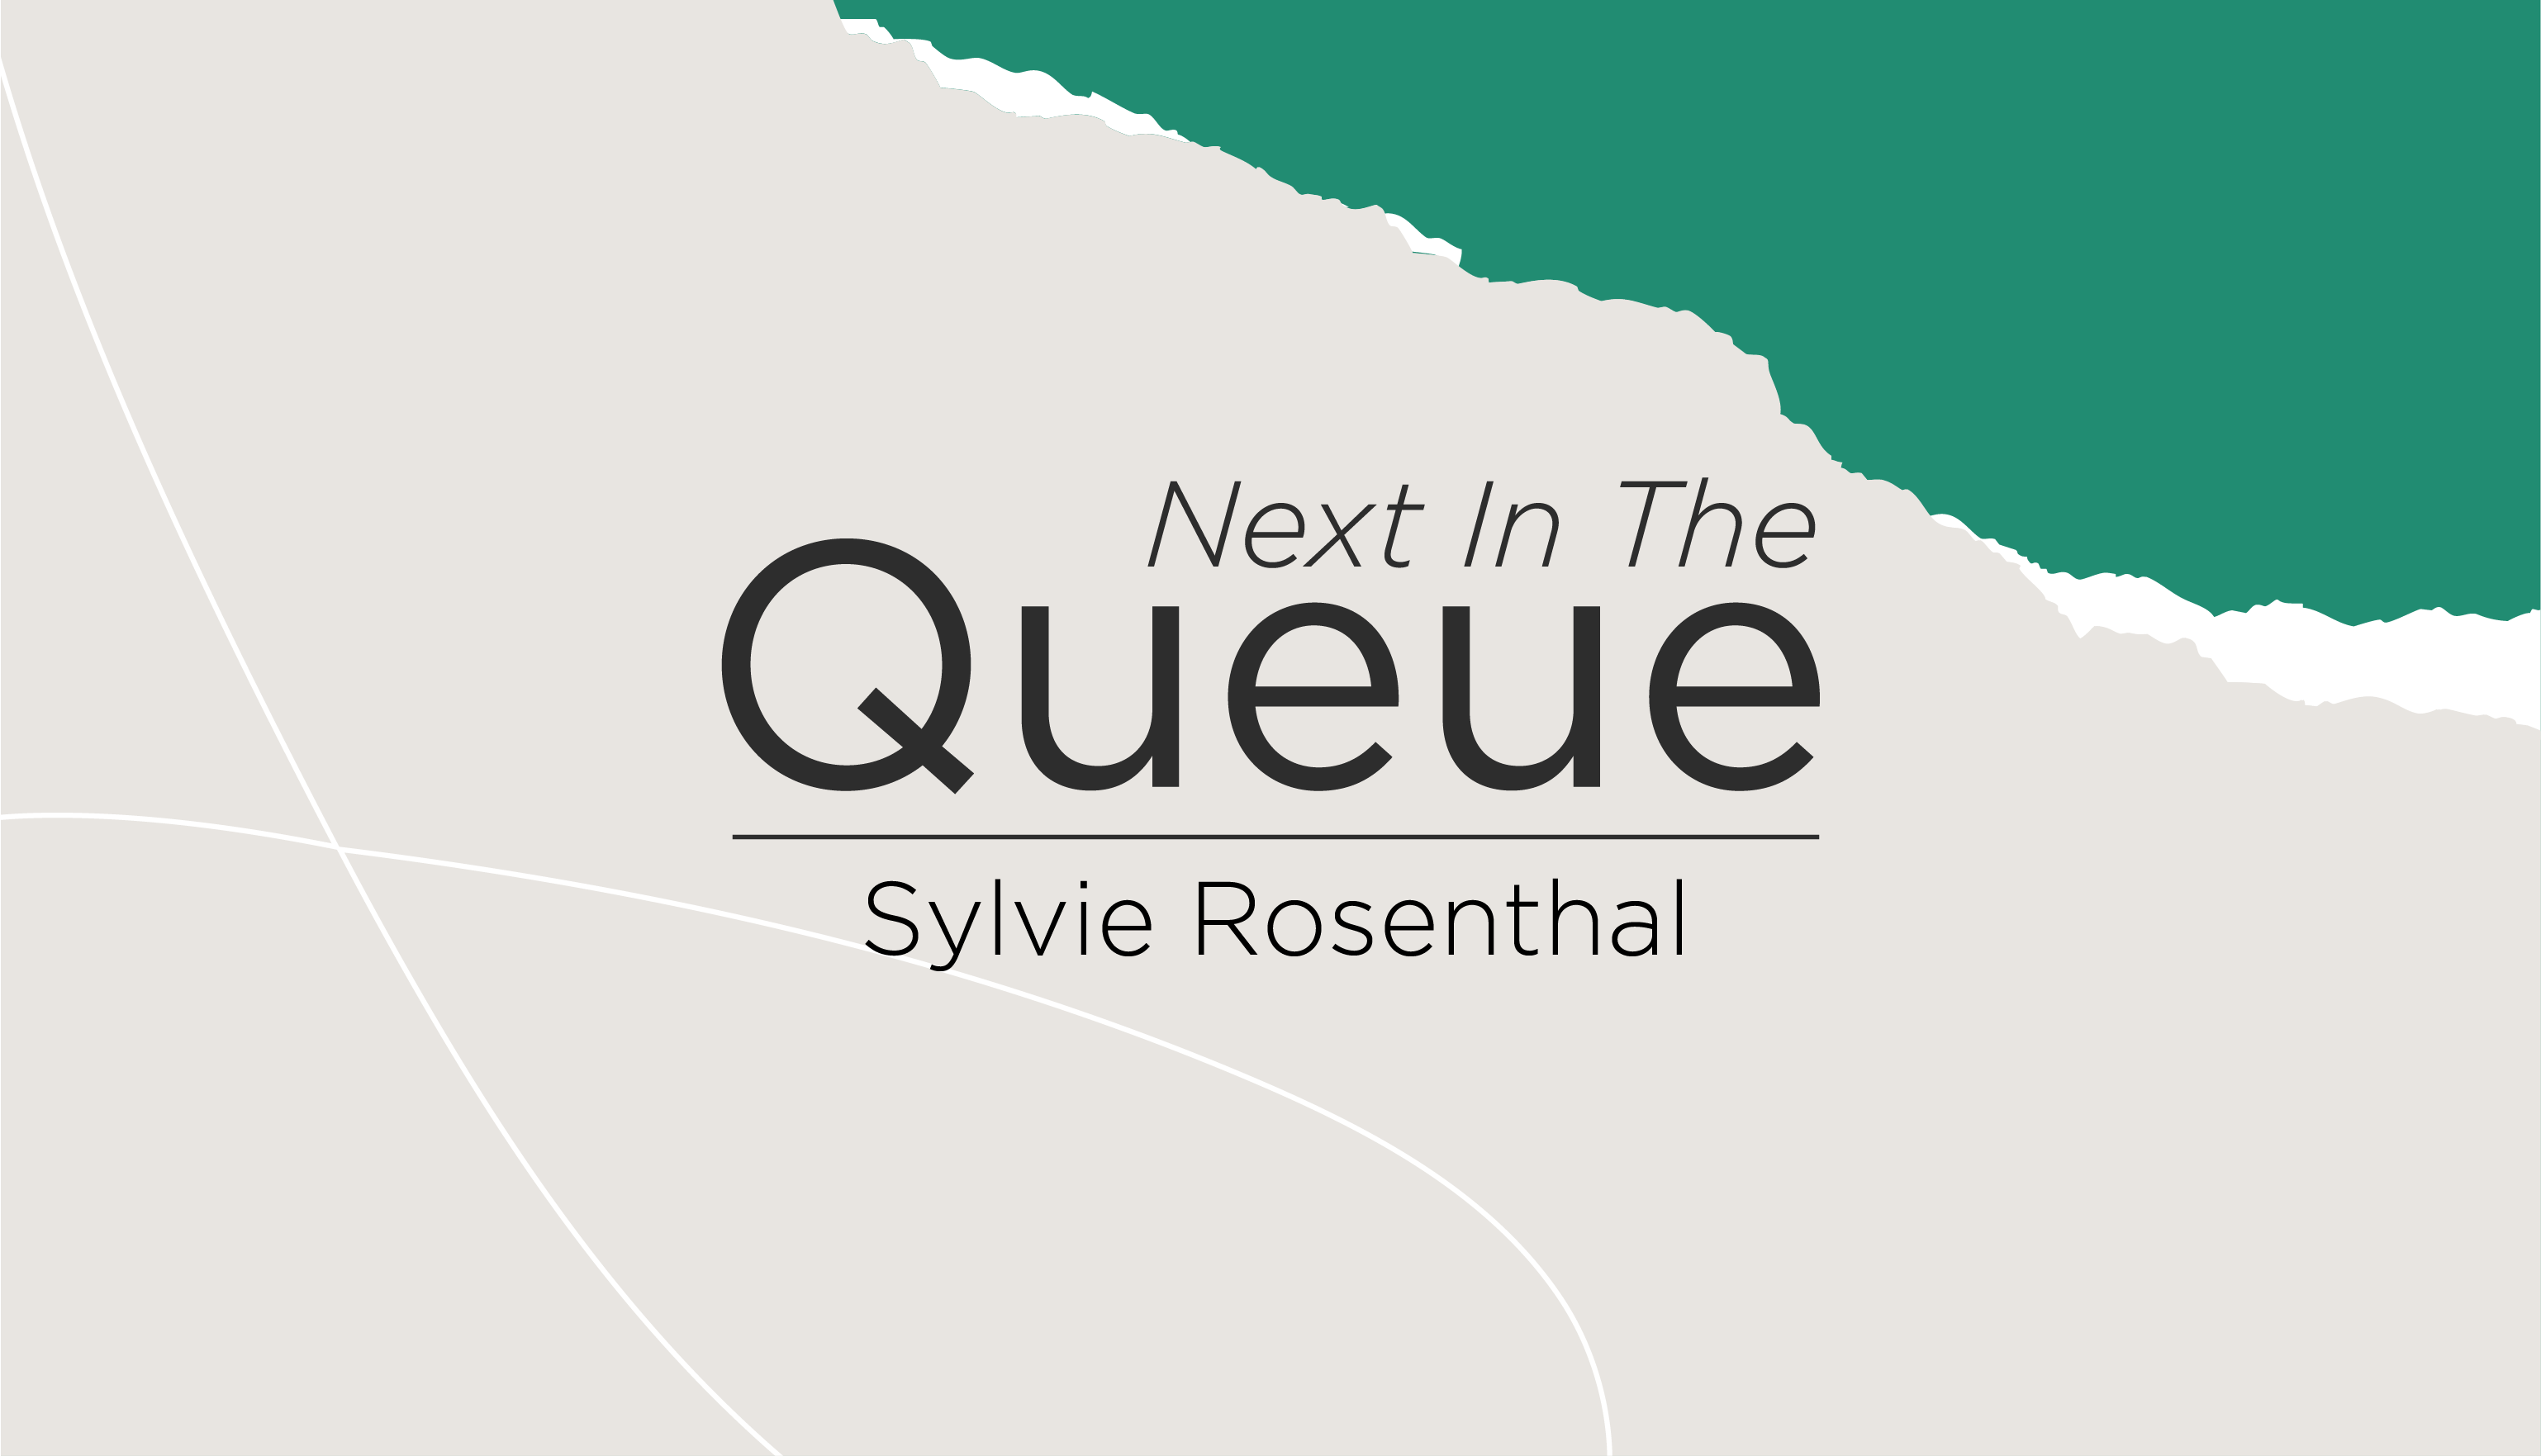 blog post cover graphic for The Queue featuring Sylvie Rosenthal